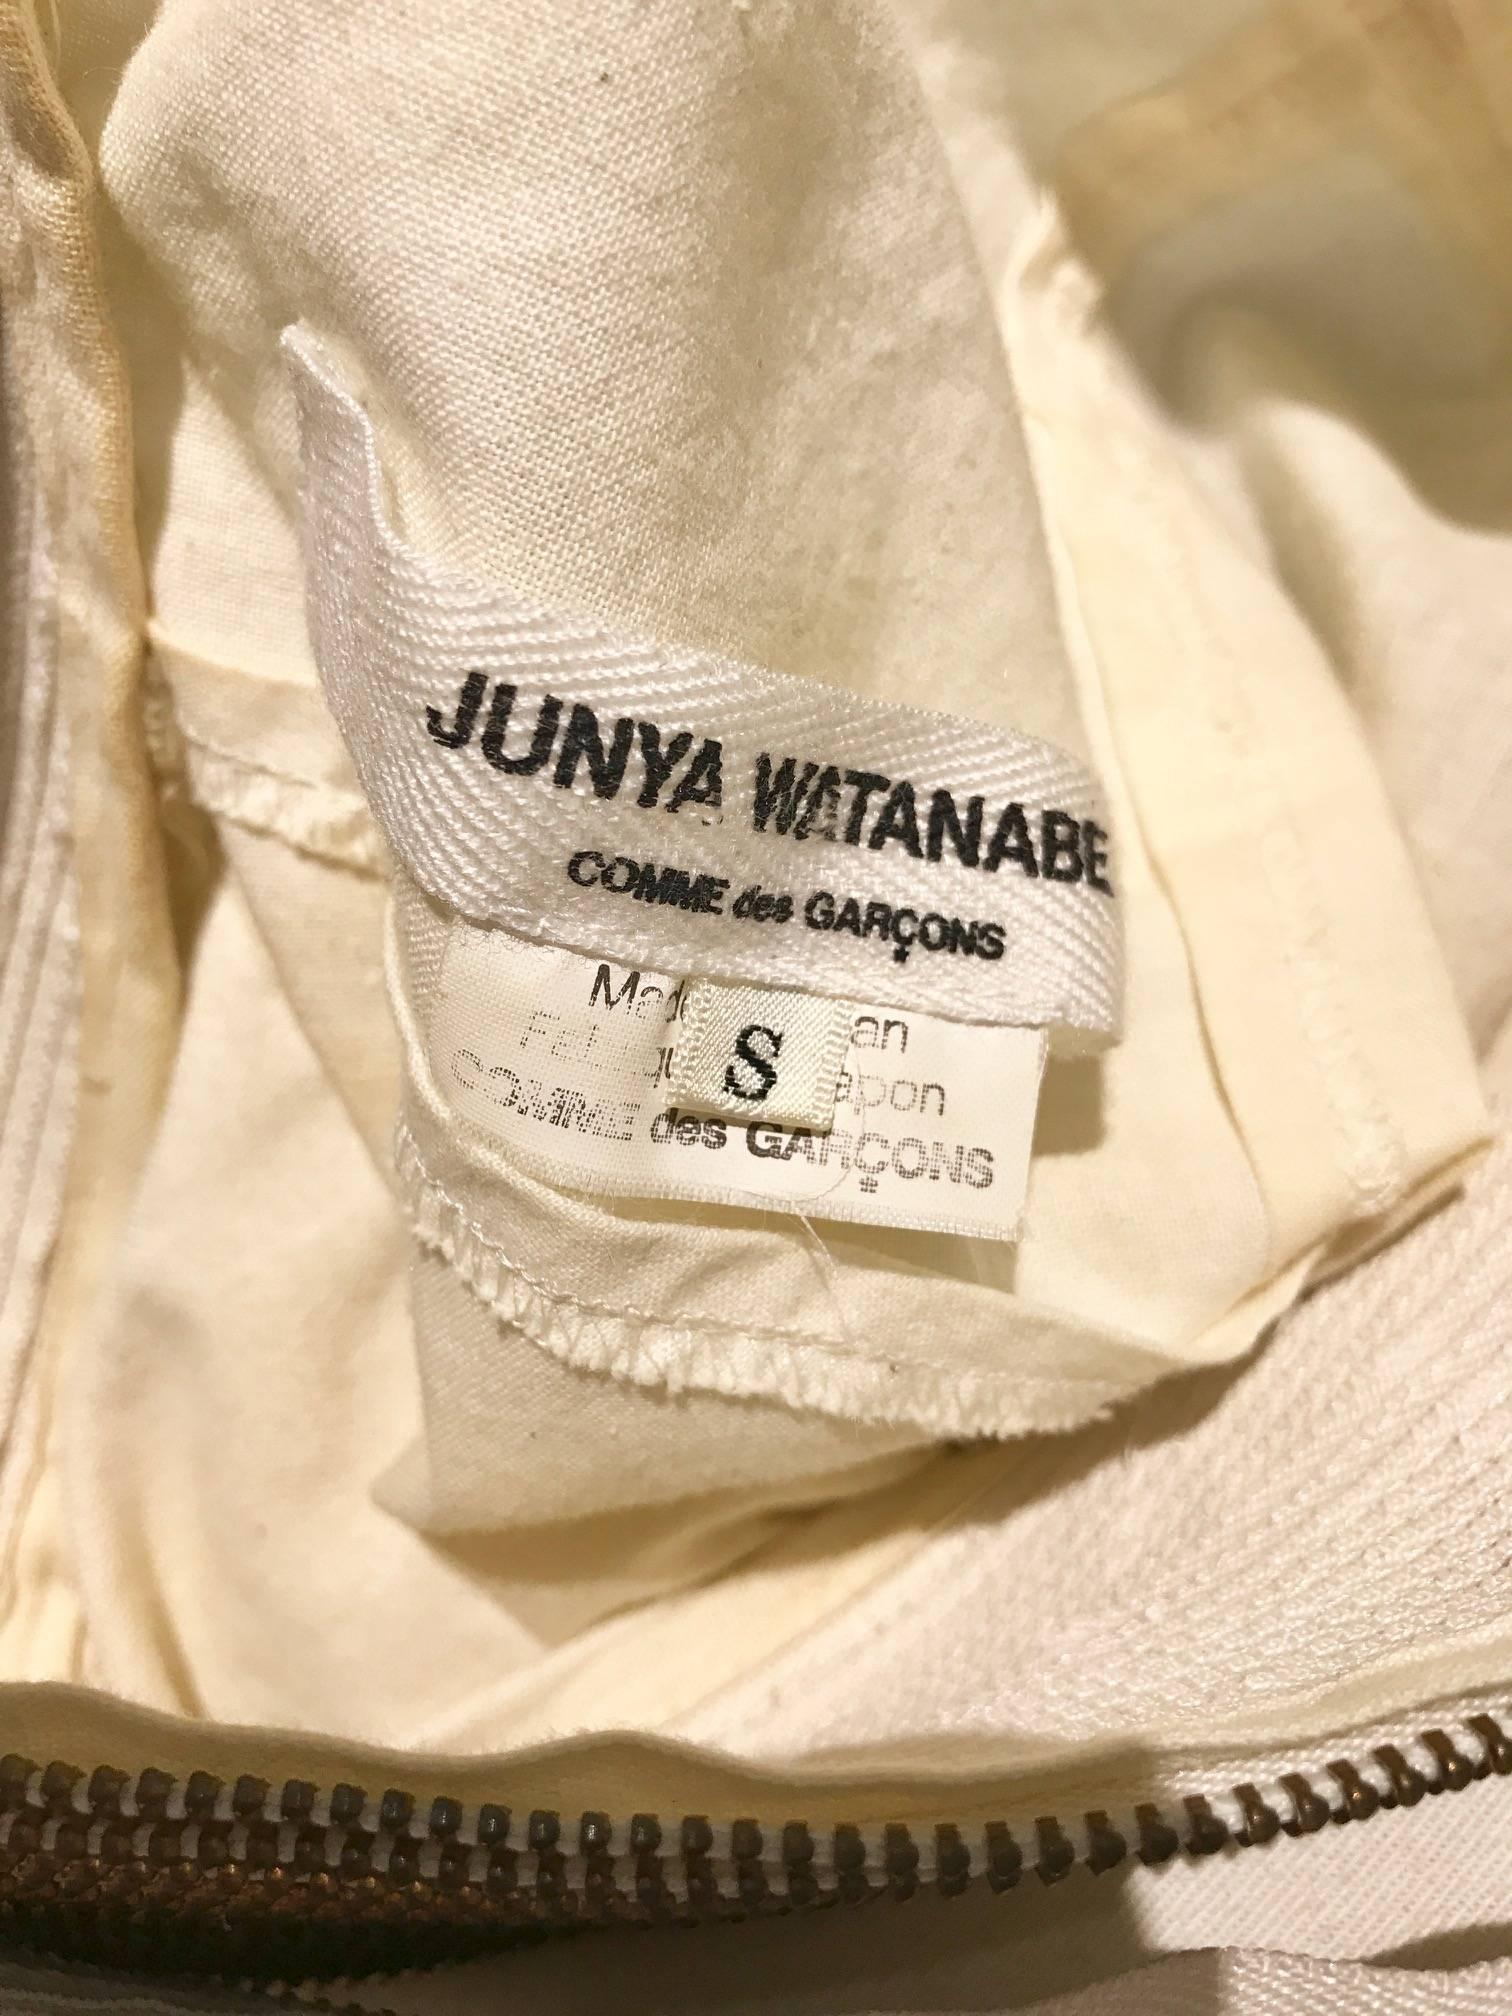 2000s JUNYA WATANABE Creme Deconstructed Cotton Blouse with Asymmetrical zipper collar. slightly exposed bare back.
Blouse fit size 2/4/6 Small - Medium
Blouse is styled with Black Junya Watanabe Fanny Pack maxi Skirt available at my 1stdibs store.
